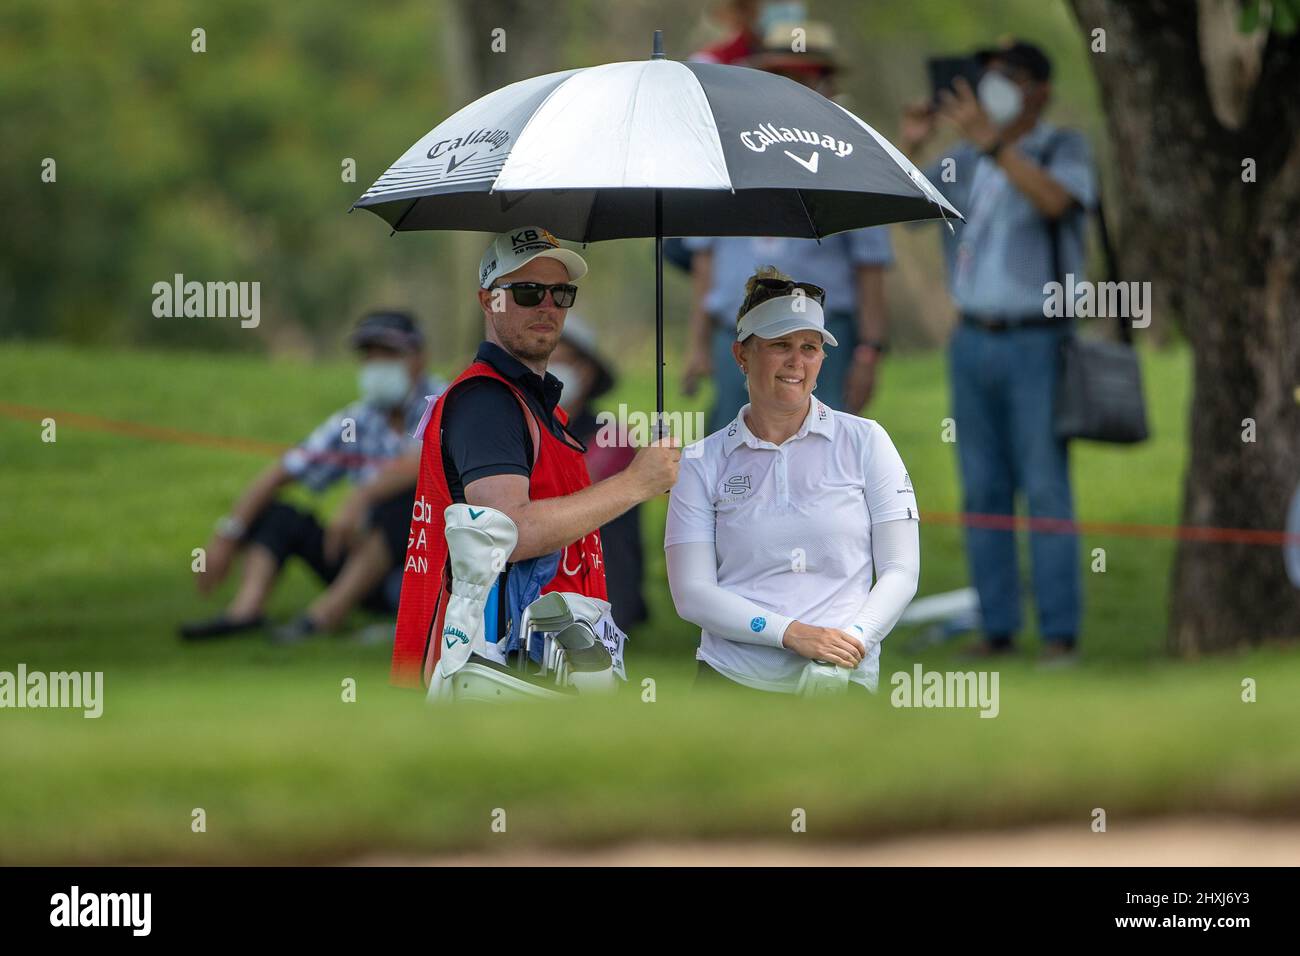 Pattaya Thailand - March 13: Nanna Koerstz Madsen from Denmark during the 4th and final day of The Honda LPGA Thailand at Siam Country Club Old Course on March 13, 2022 in Pattaya, Thailand (Photo by Peter van der Klooster/Orange Pictures) Credit: Orange Pics BV/Alamy Live News Stock Photo